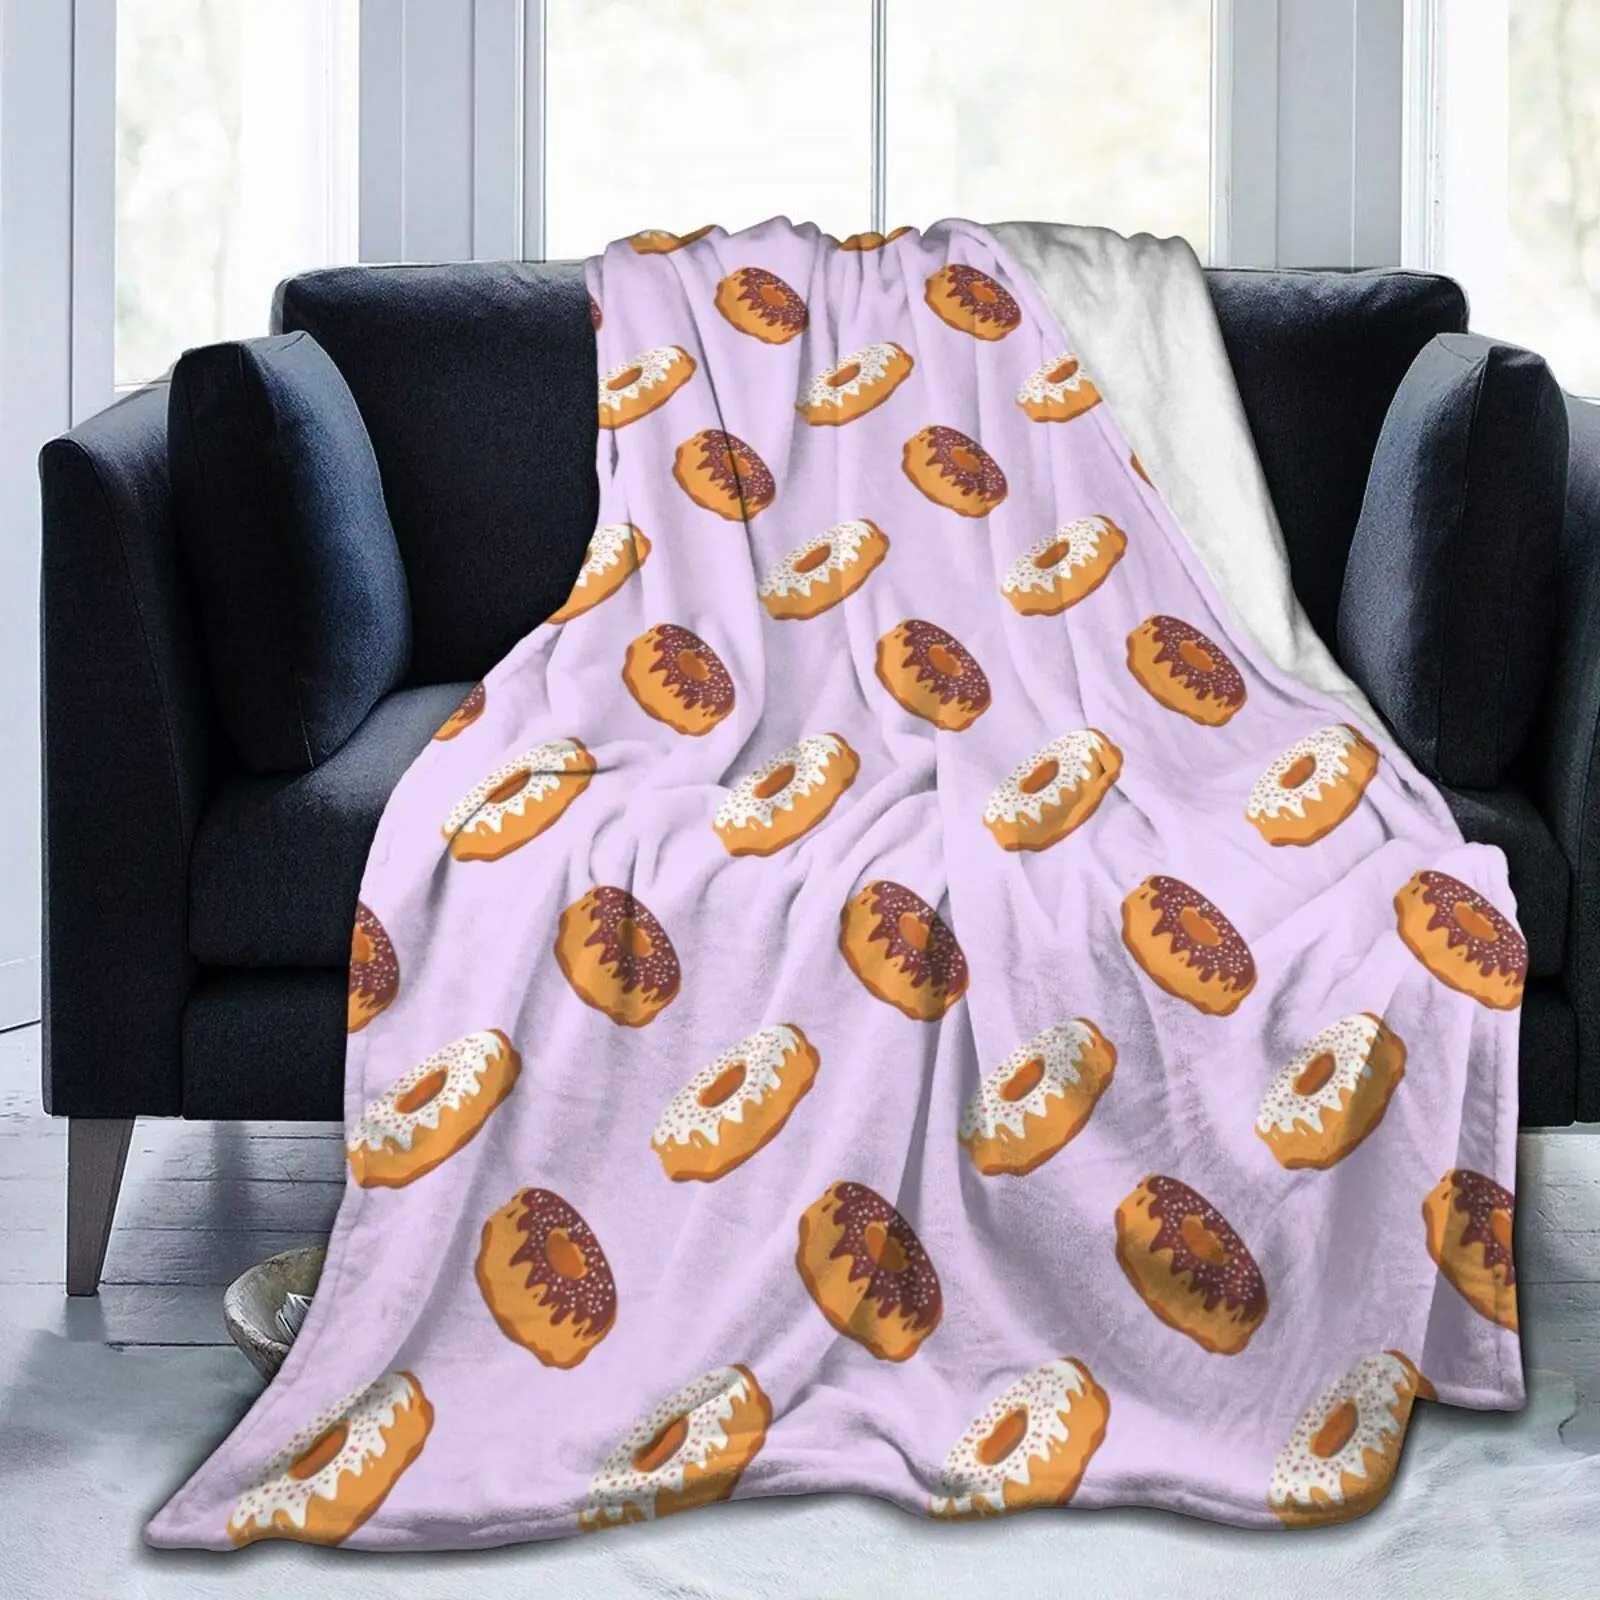 

Sweet Donuts Blanket,Flannel Throw Blanket Ultra Soft Micro Fleece Blanket Bed Couch Living Room 50"X40" for Baby